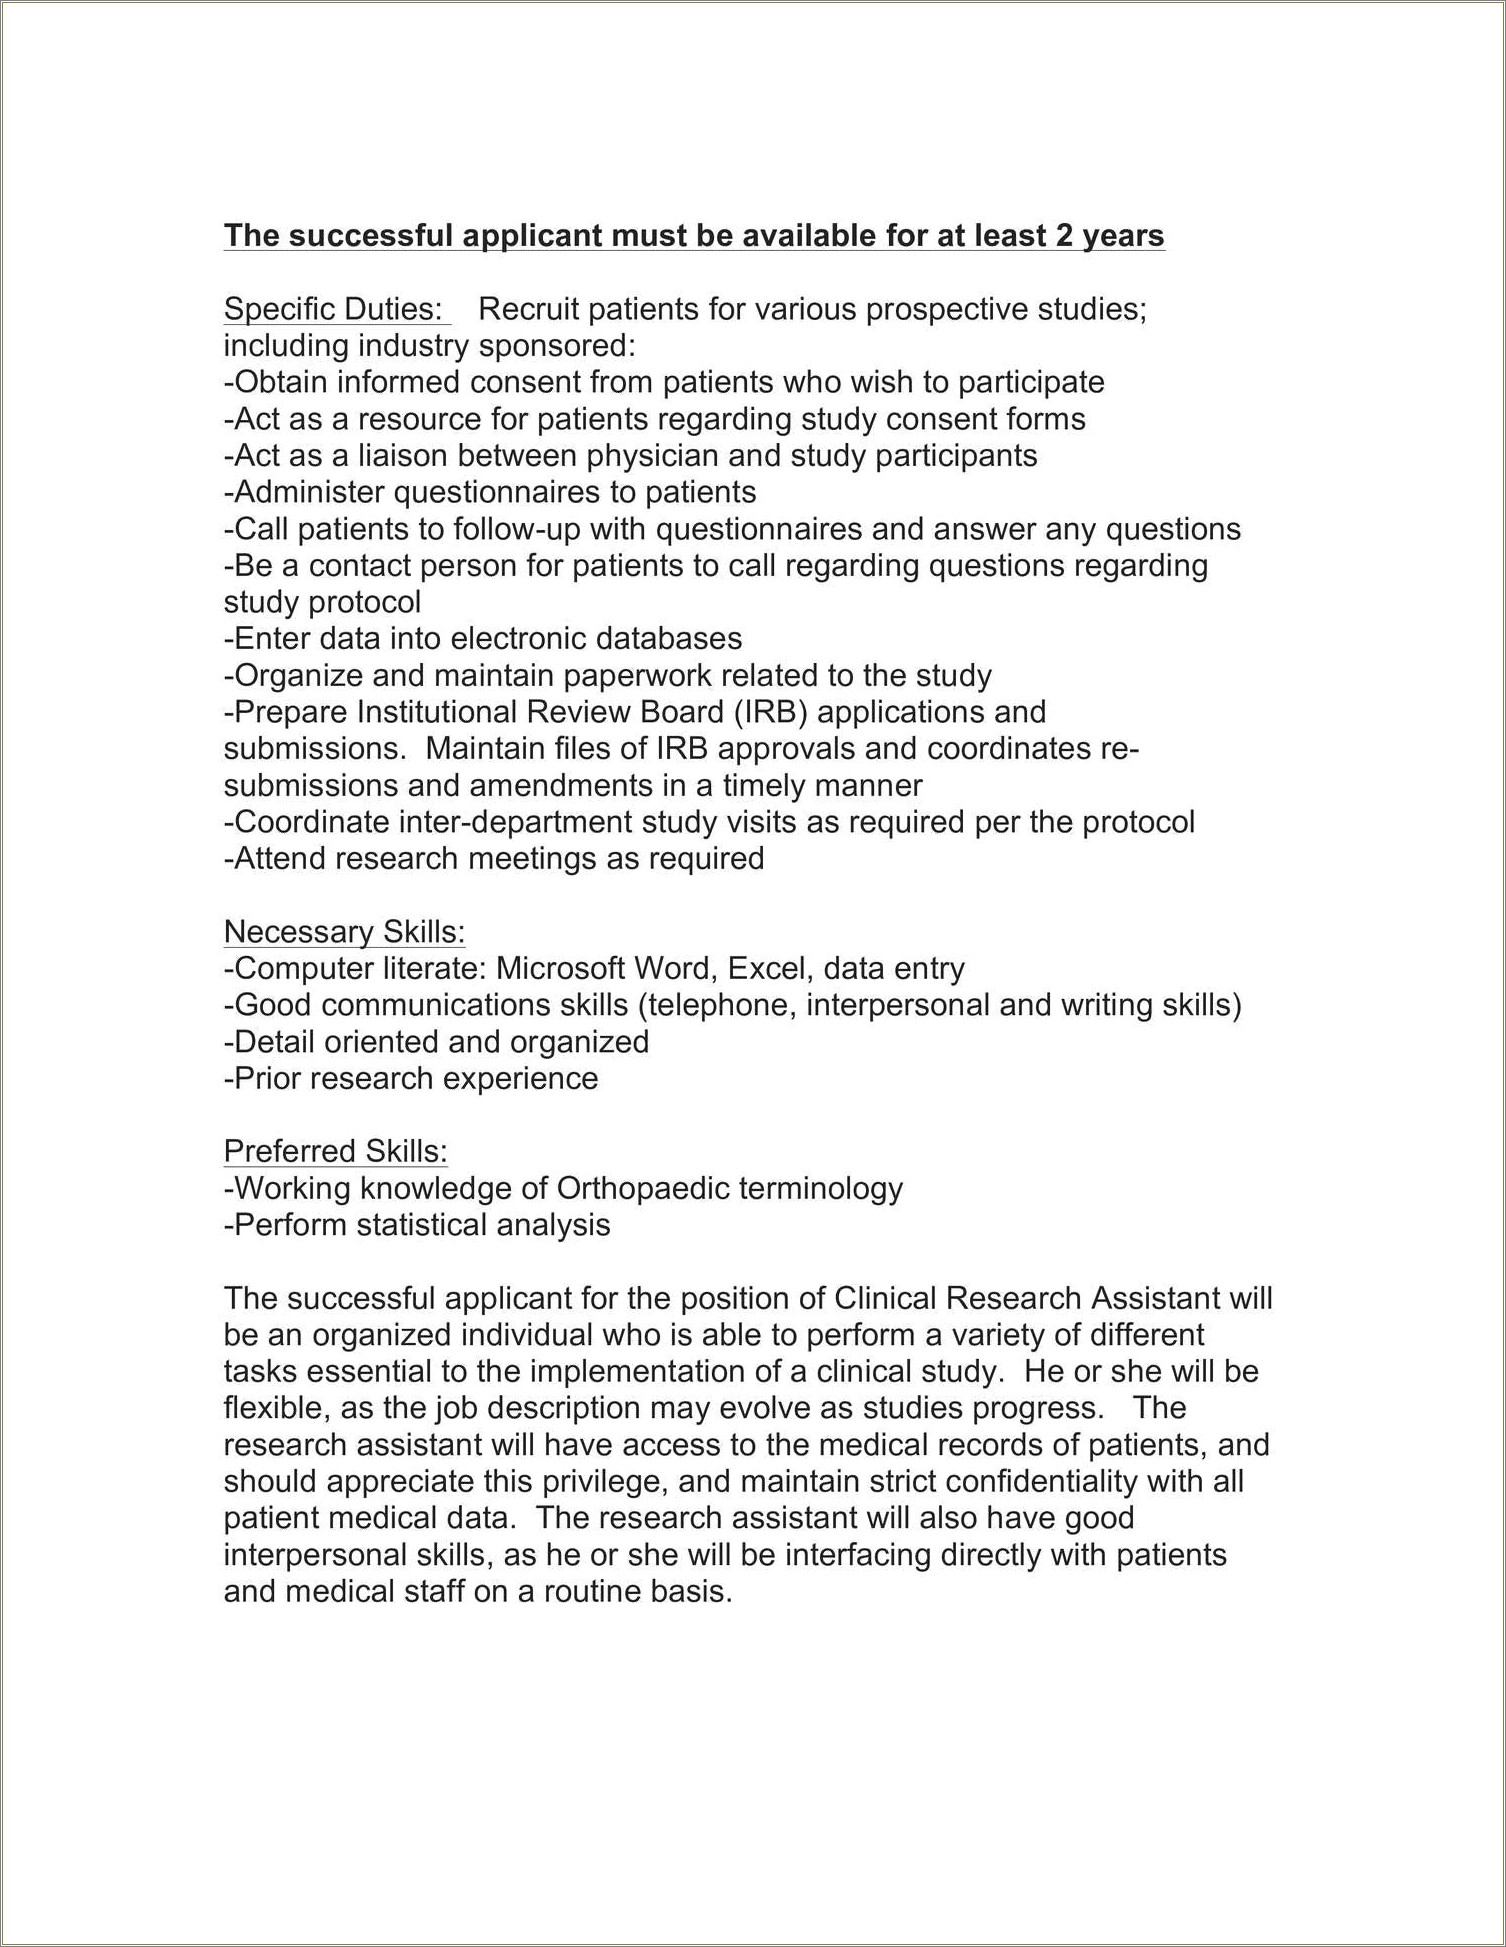 Resume Summary For A Clinical Trials Assistant